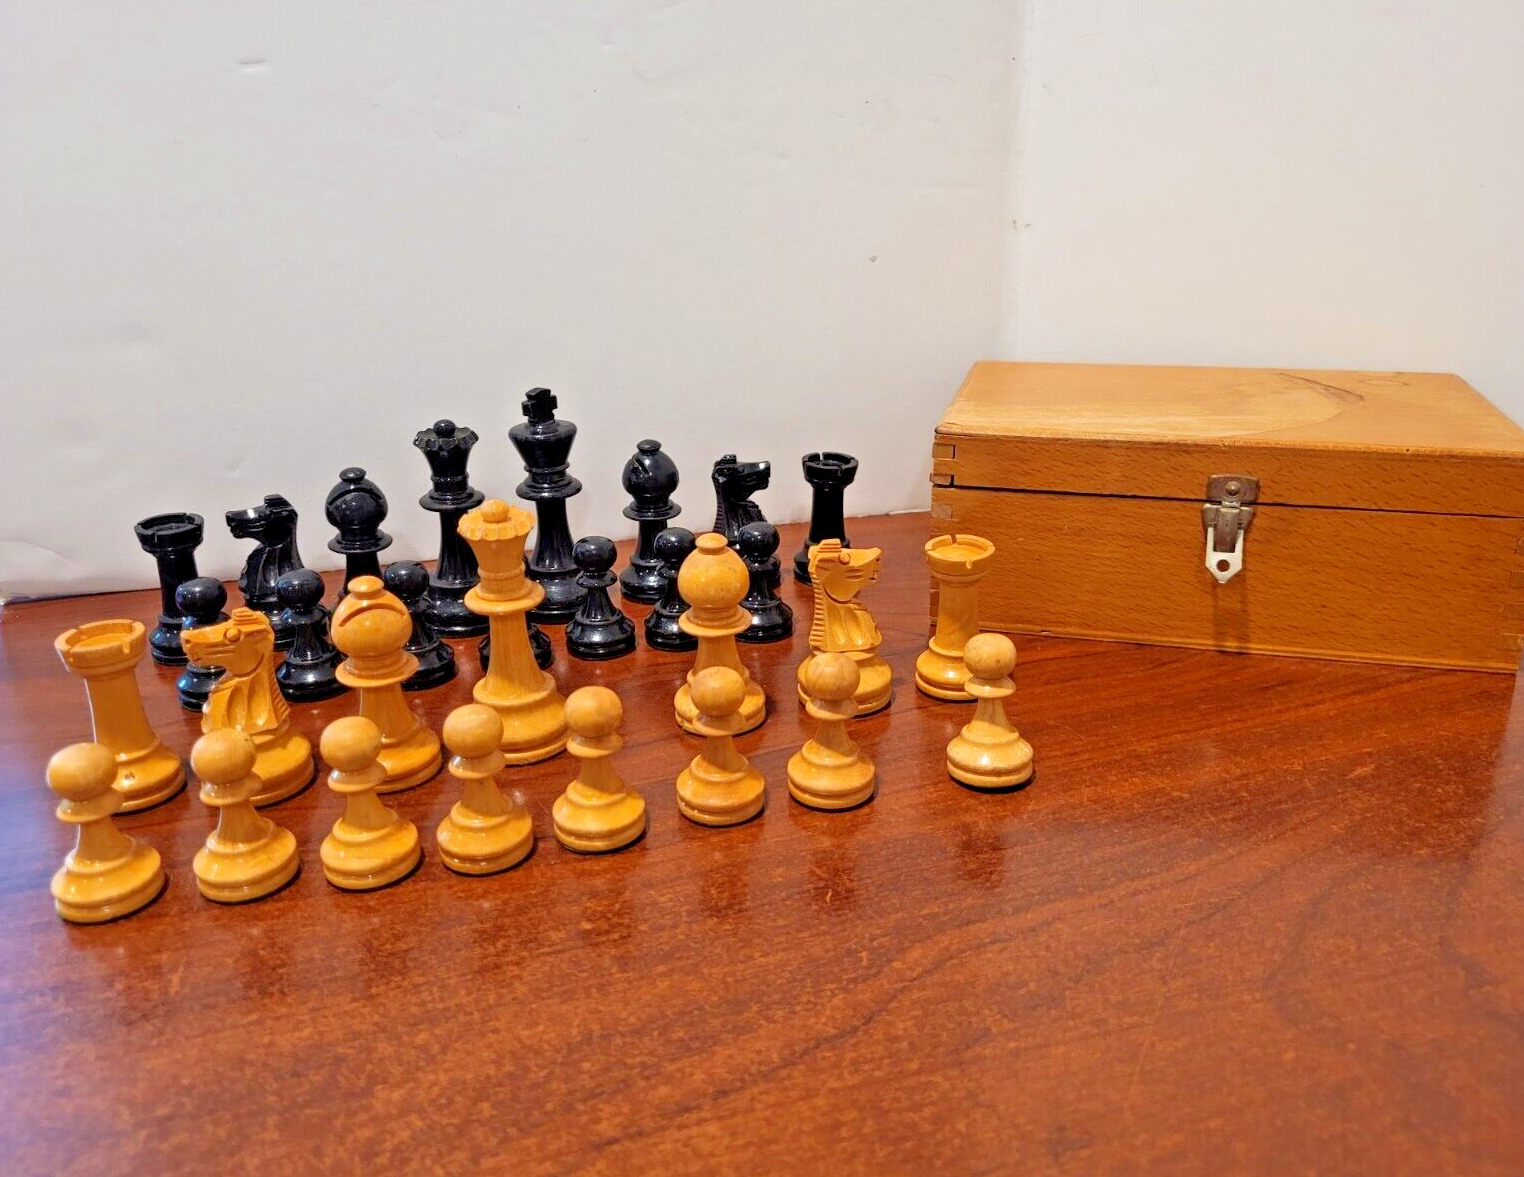 Vintage  STAUNTON  Wood Chess Pieces MADE IN FRANCE   No. 253   Missing 2 pieces